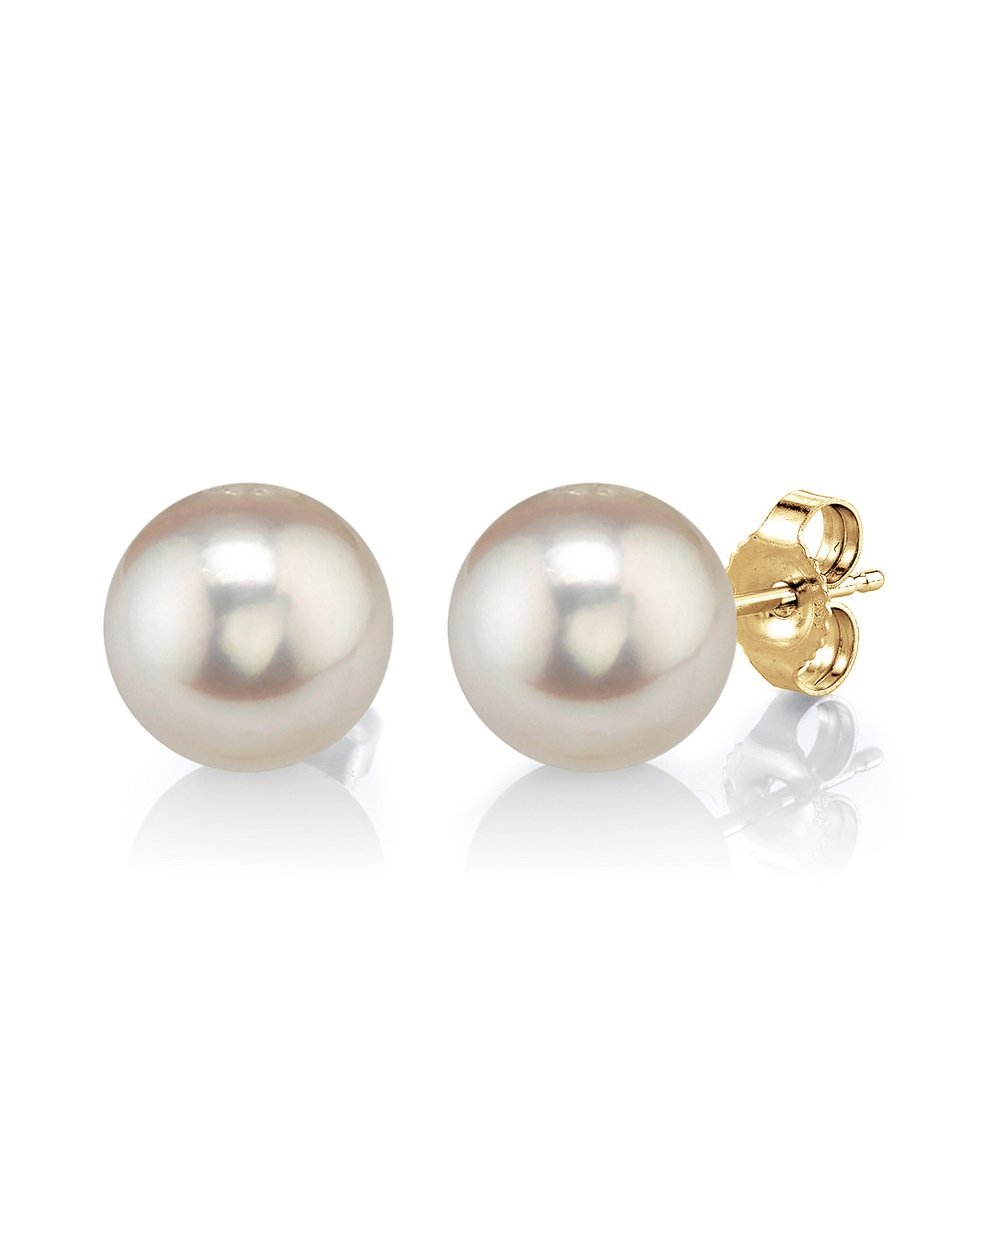 8mm White Freshwater Round Pearl Stud Earrings - Pure Pearls